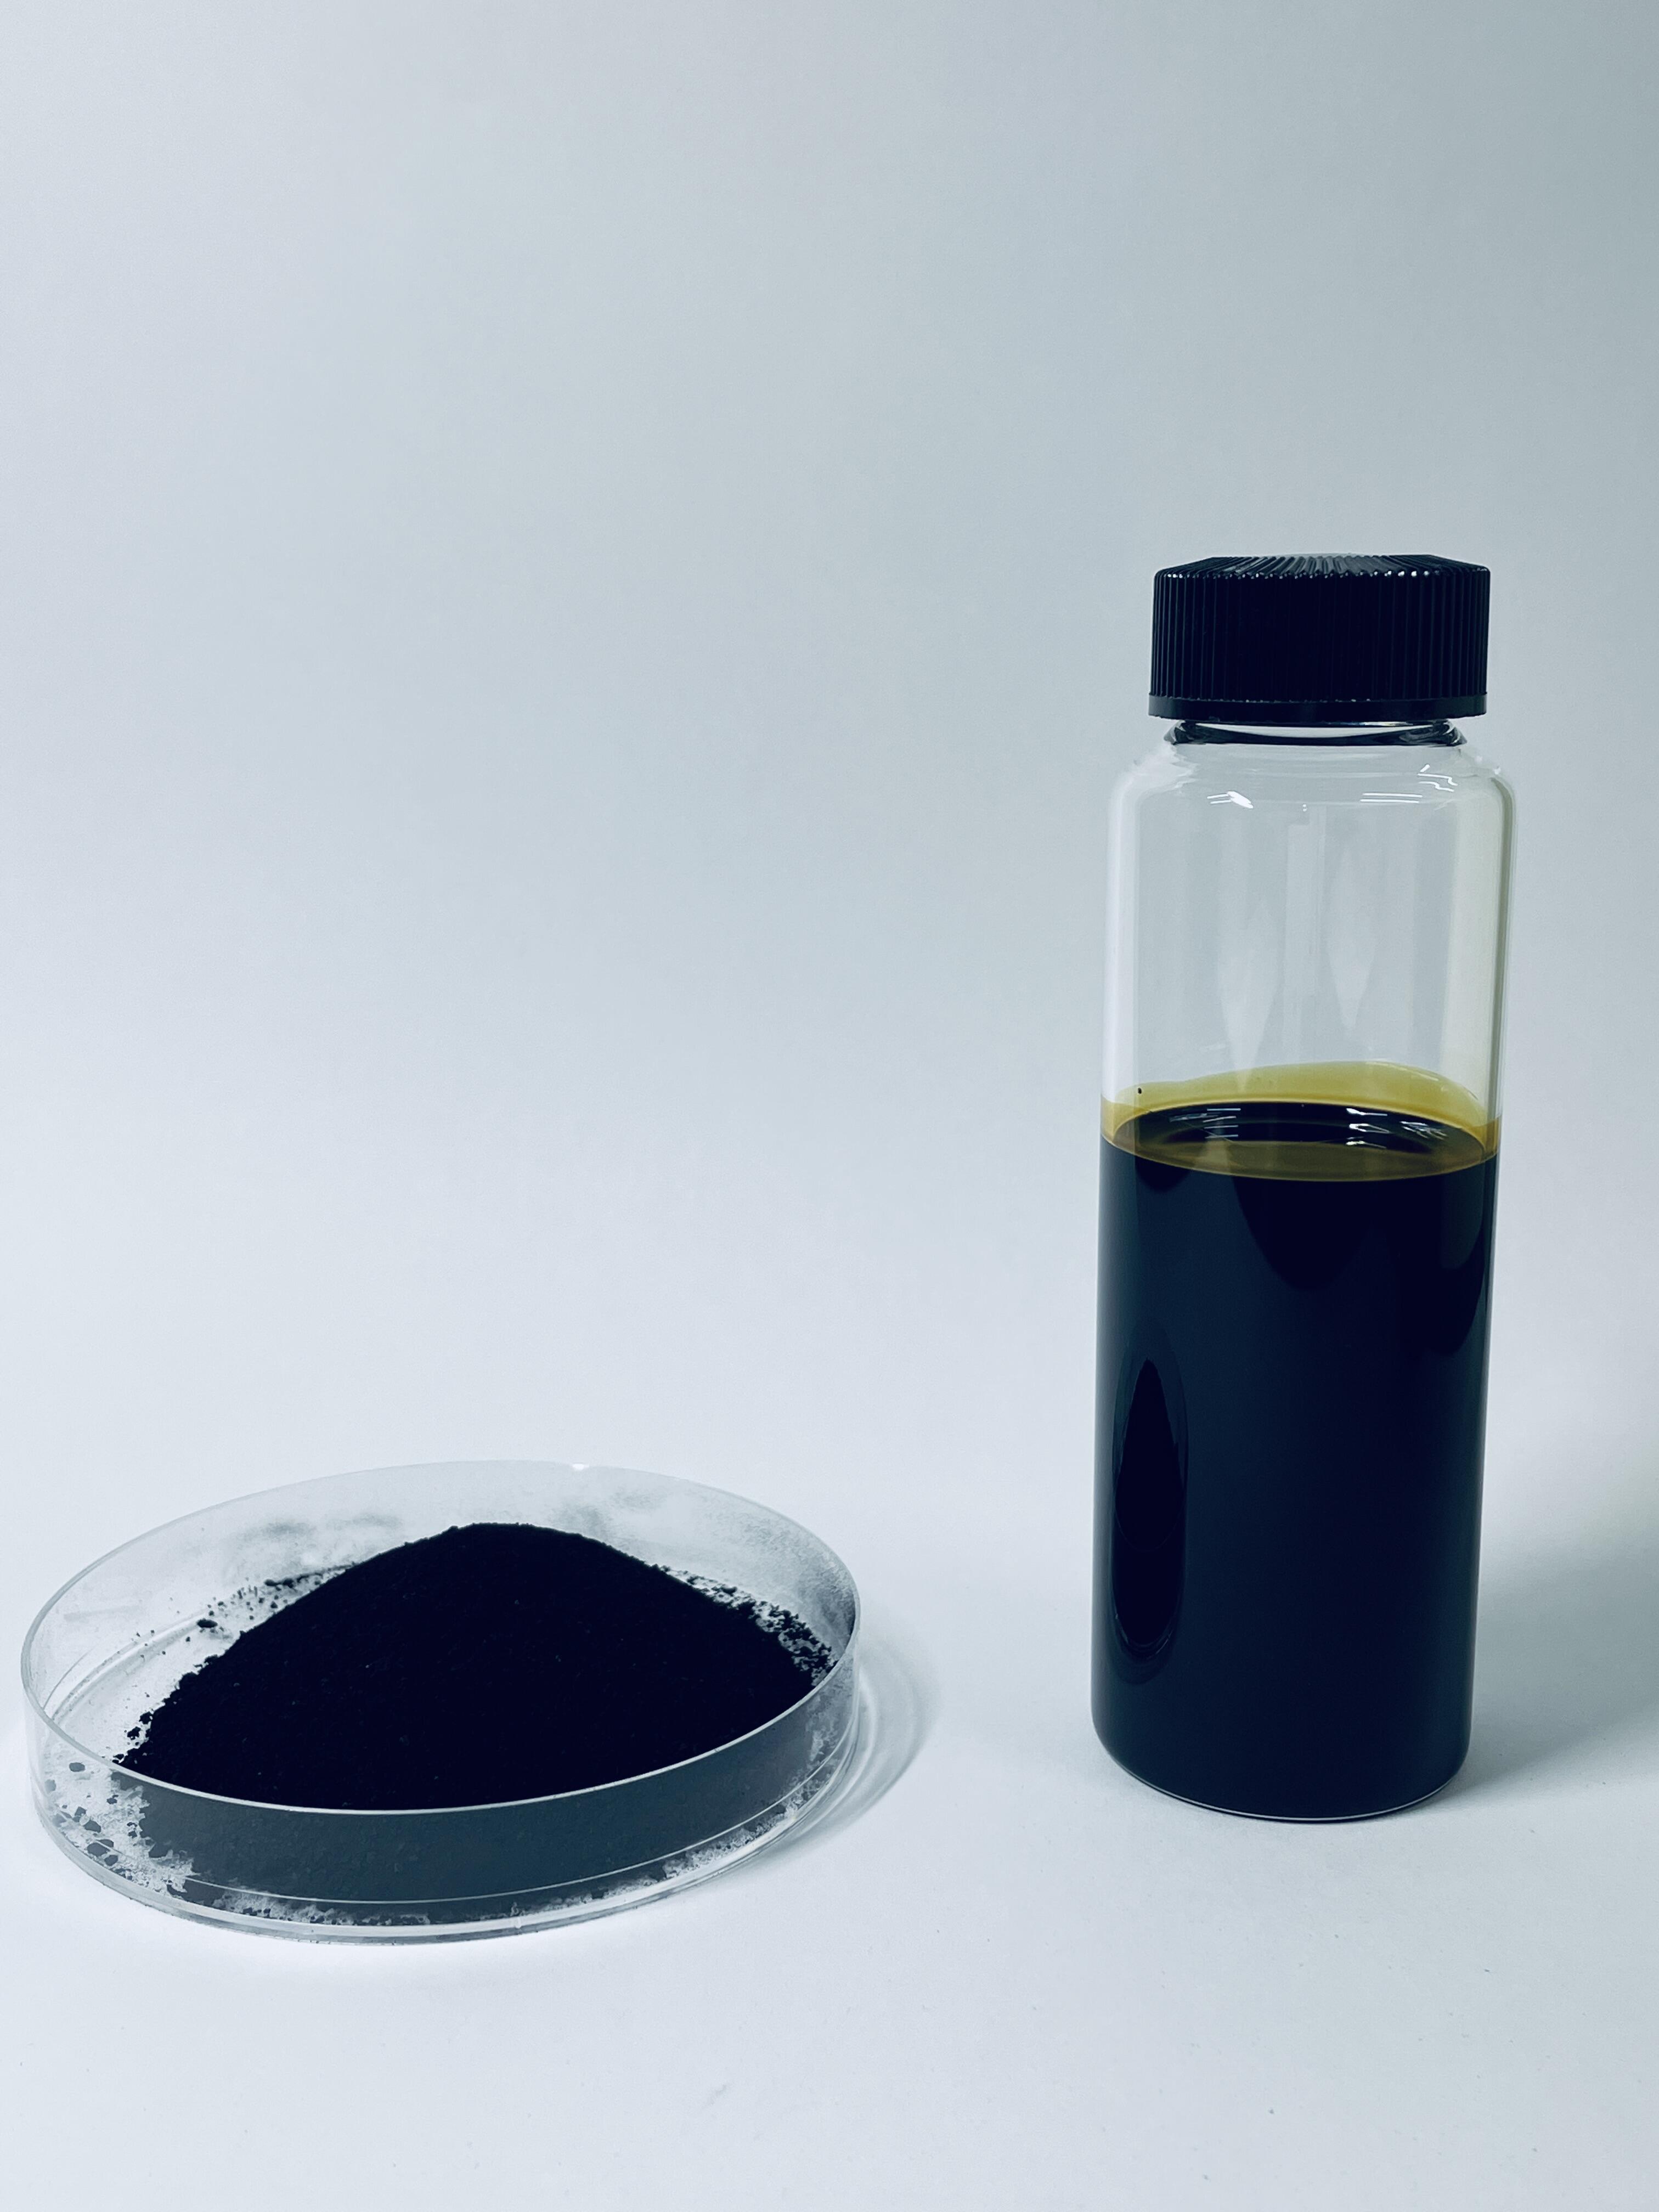 Recycled carbon black (left) and tire derived oil (right)